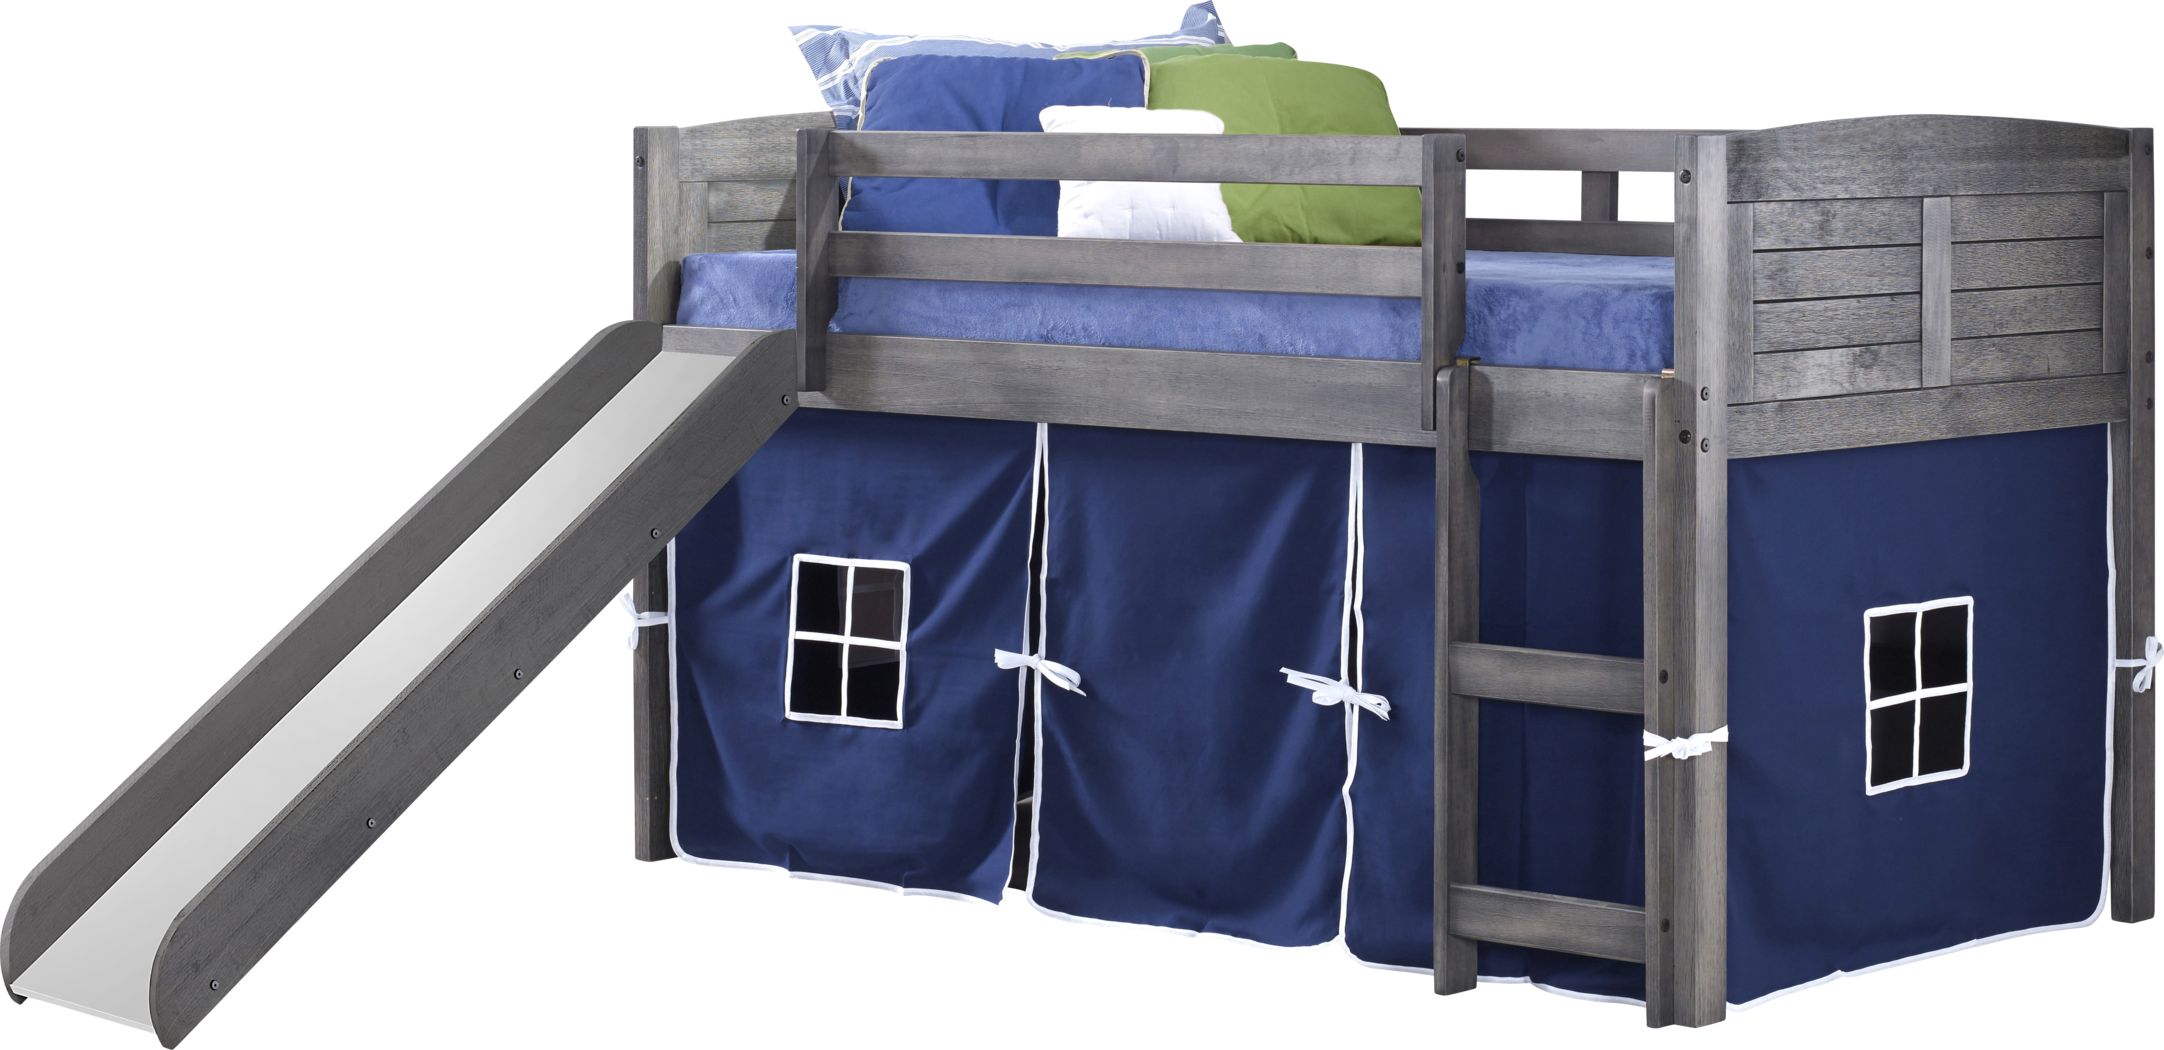 Bunk Beds For Kids, Basketball Bunk Bed With Slide